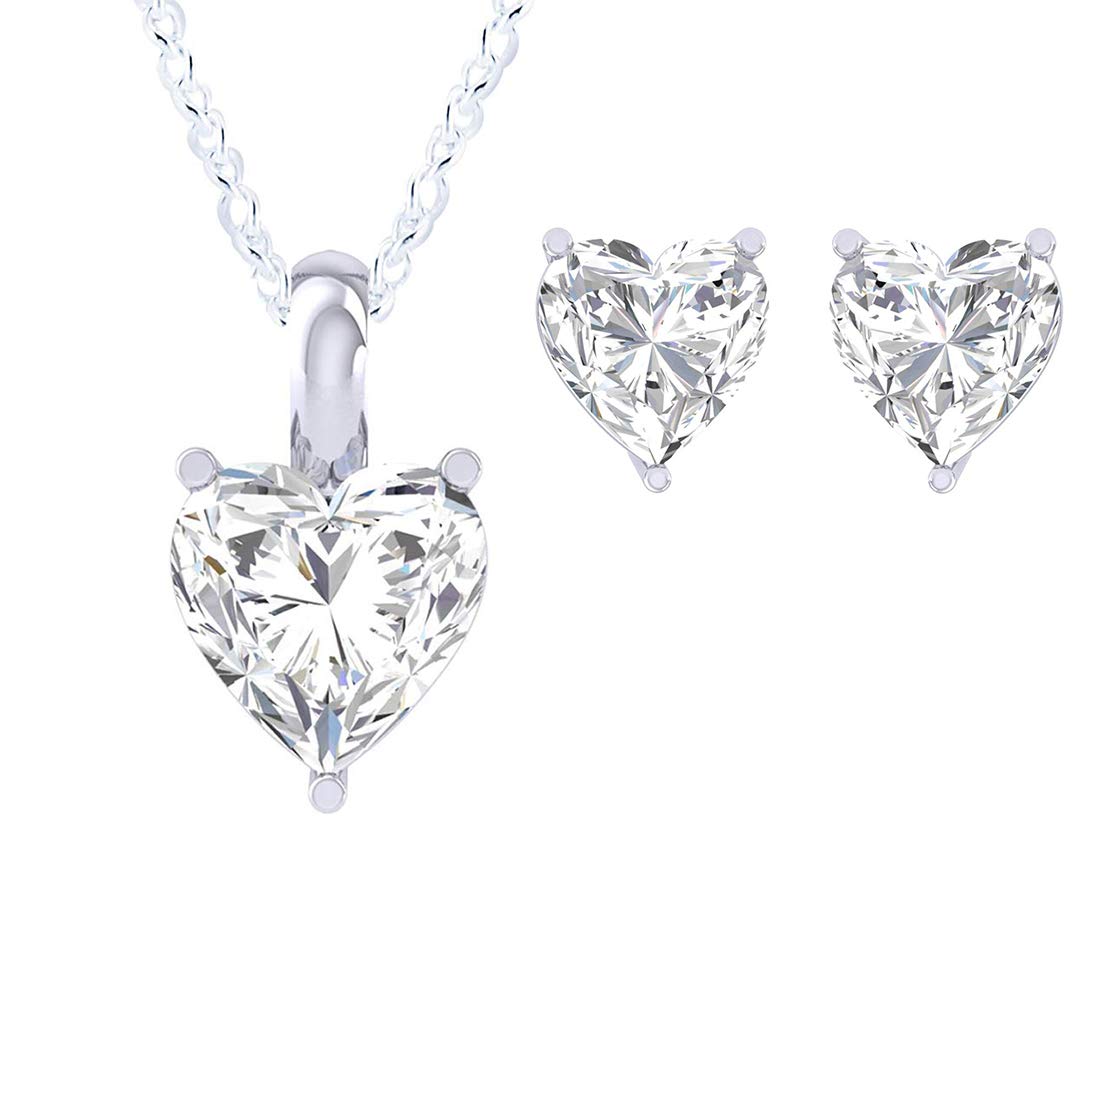 Yellow Chimes Valentine Special Heart Crystal 925 Sterling Silver Hallmark and Certified Purity Pendant Set for Women and Girls